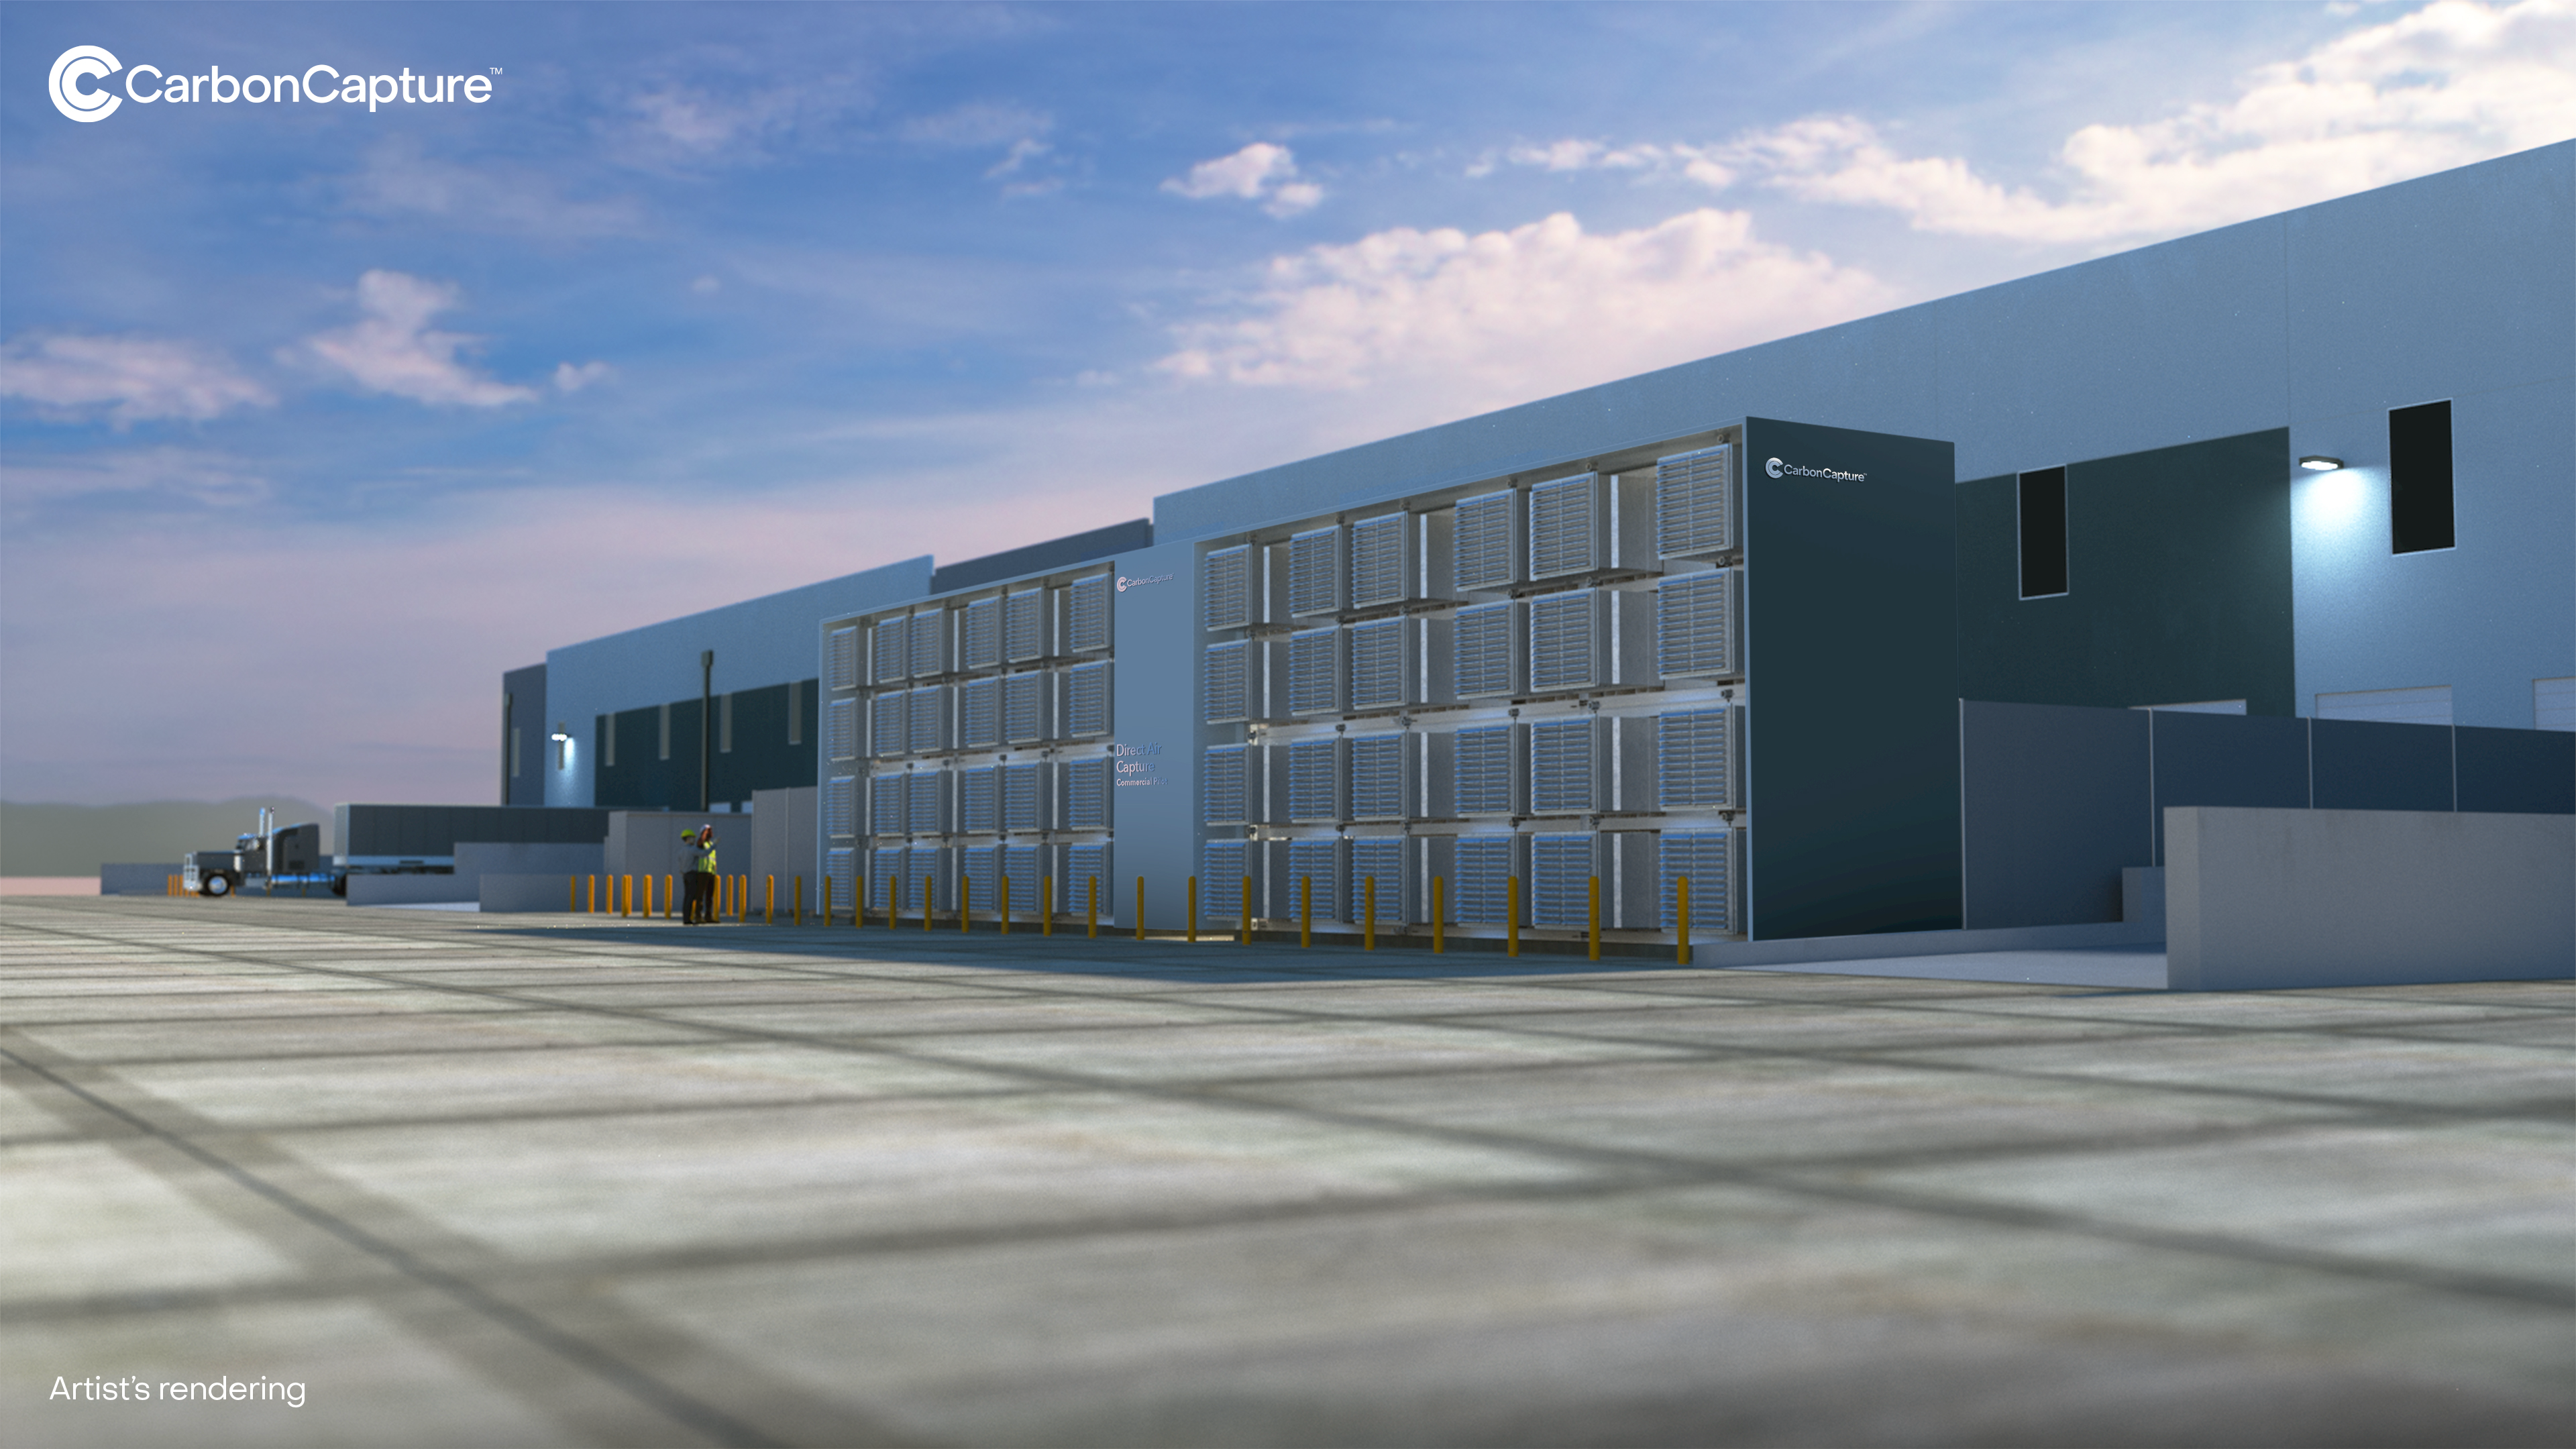 CarbonCapture Inc. secures lease for world’s first DAC manufacturing facility